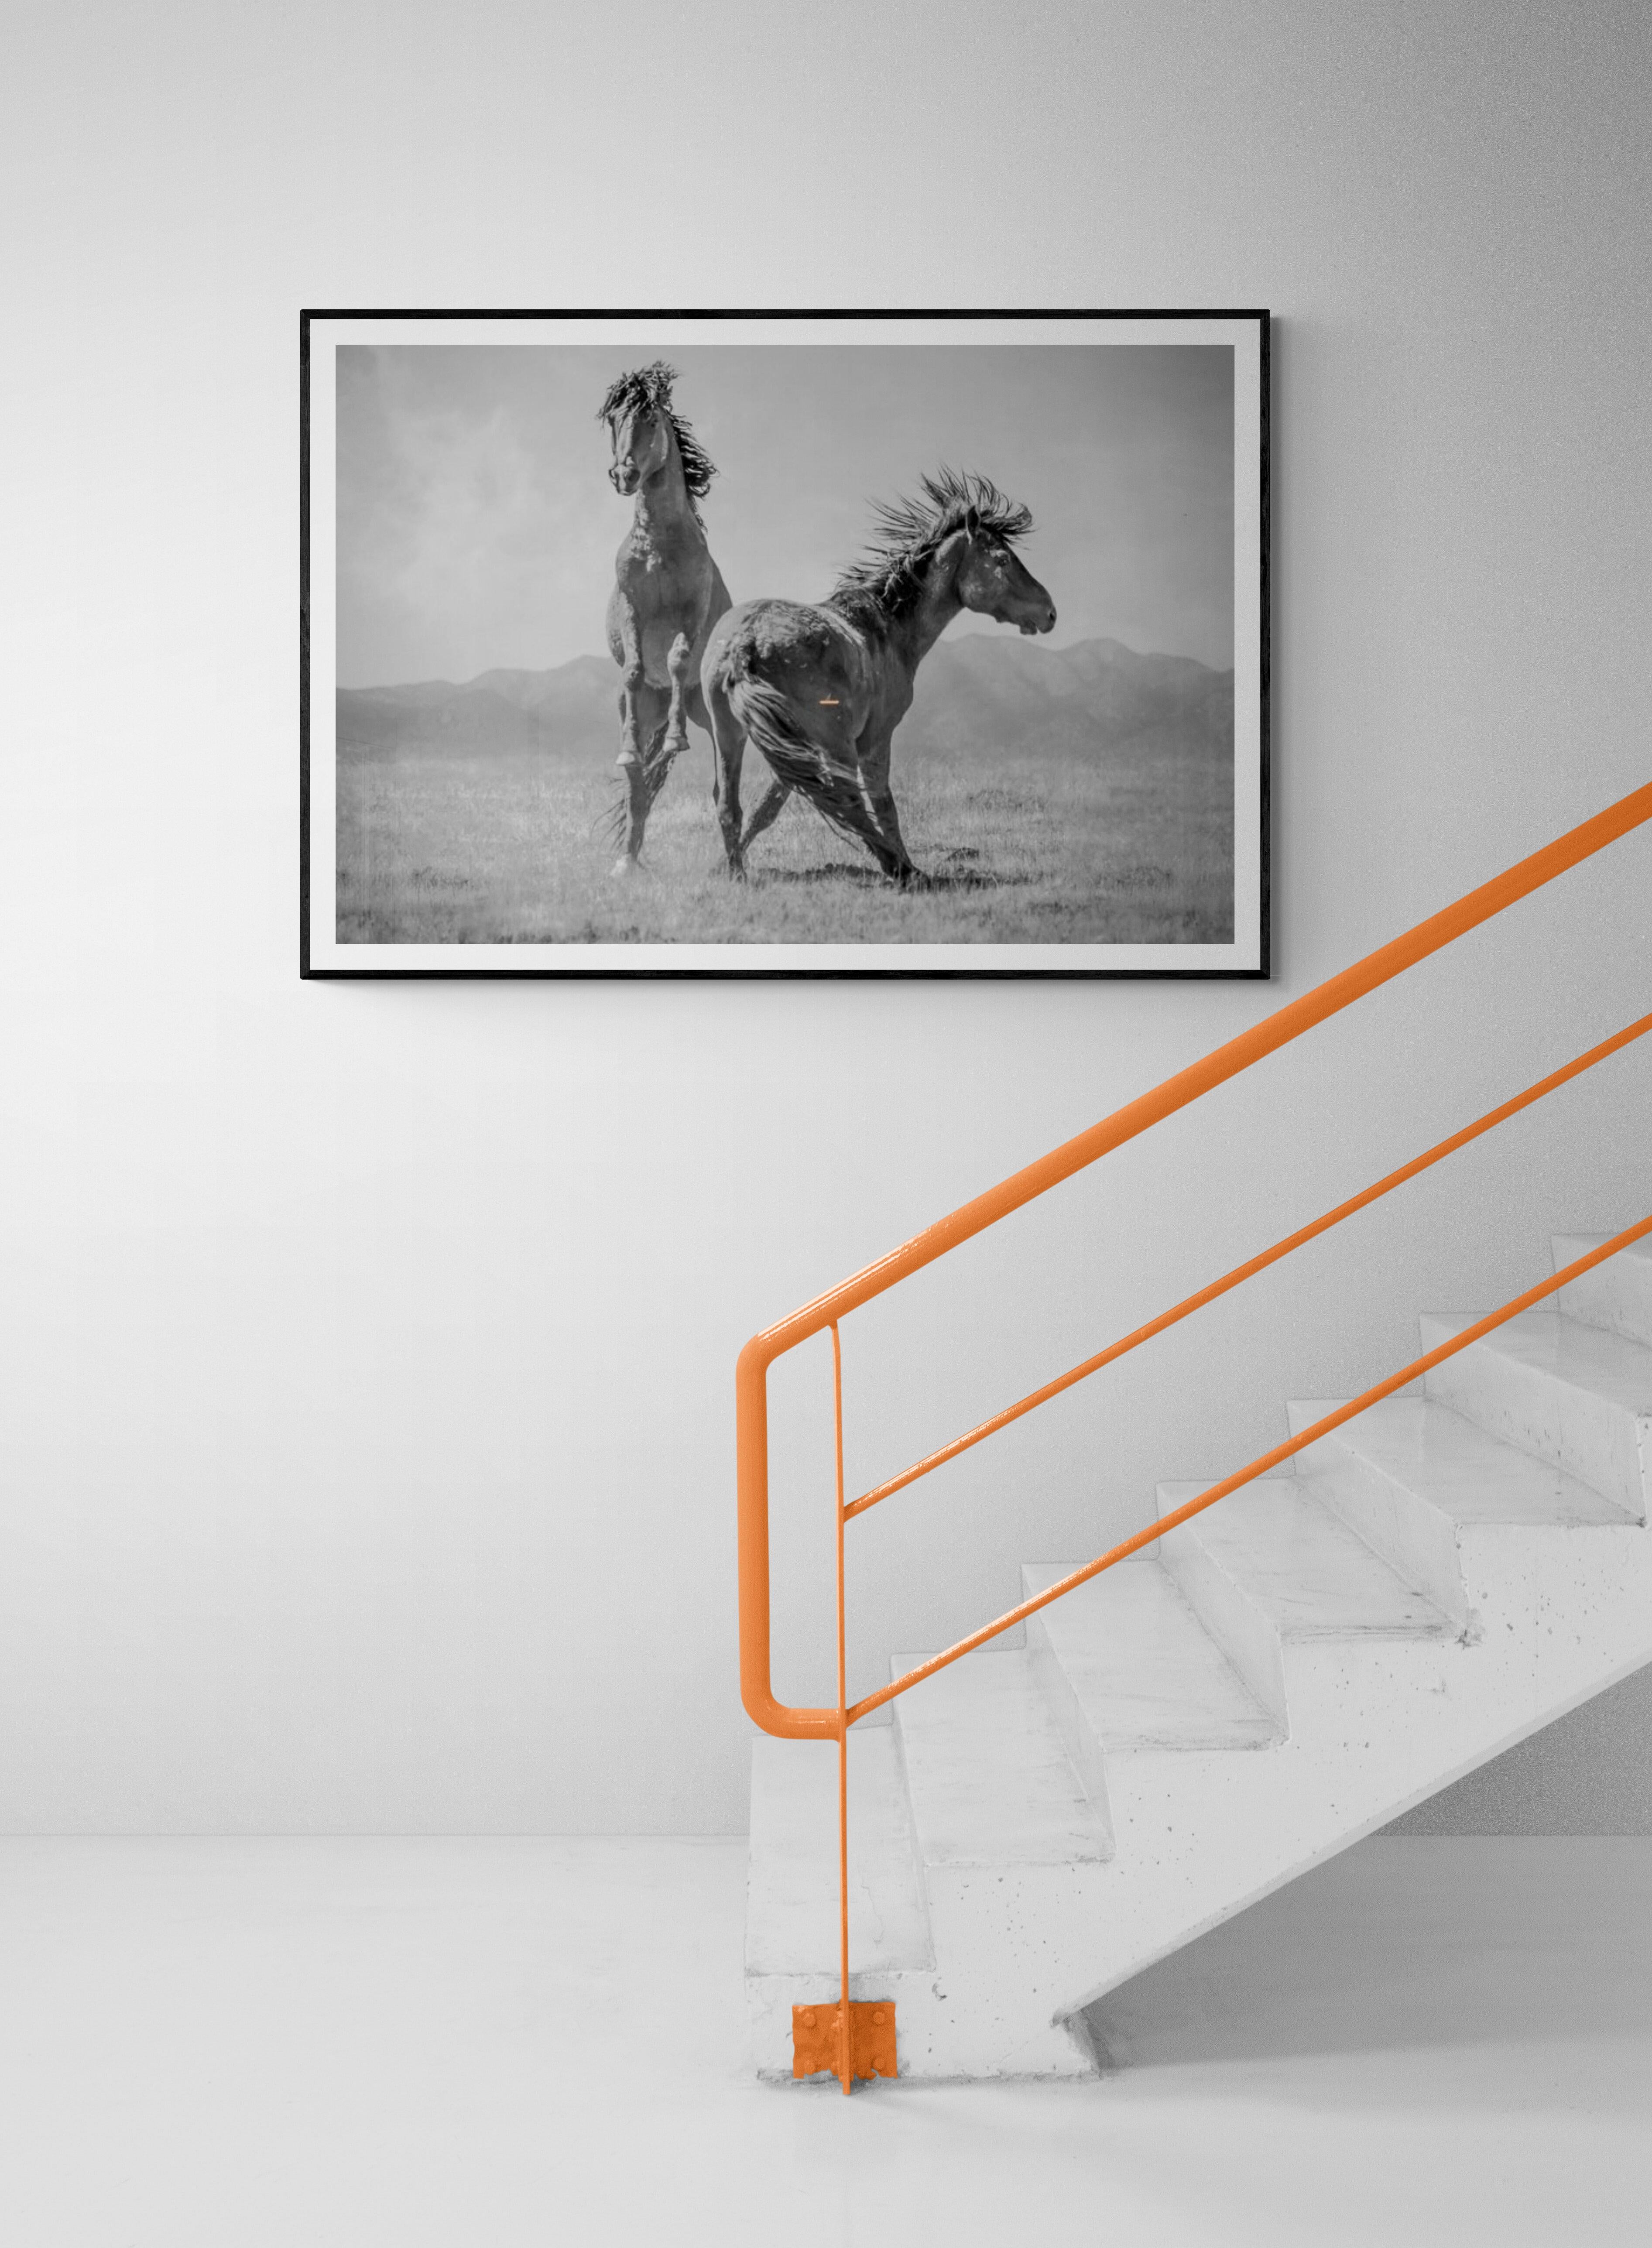 This is a contemporary photograph of American Wild Mustangs. 
40x50 Edition of 10. Signed by Shane. 
Printed on archival paper and using archival inks
Framing available. Inquire for rates. 

Shane Russeck has built a reputation for capturing